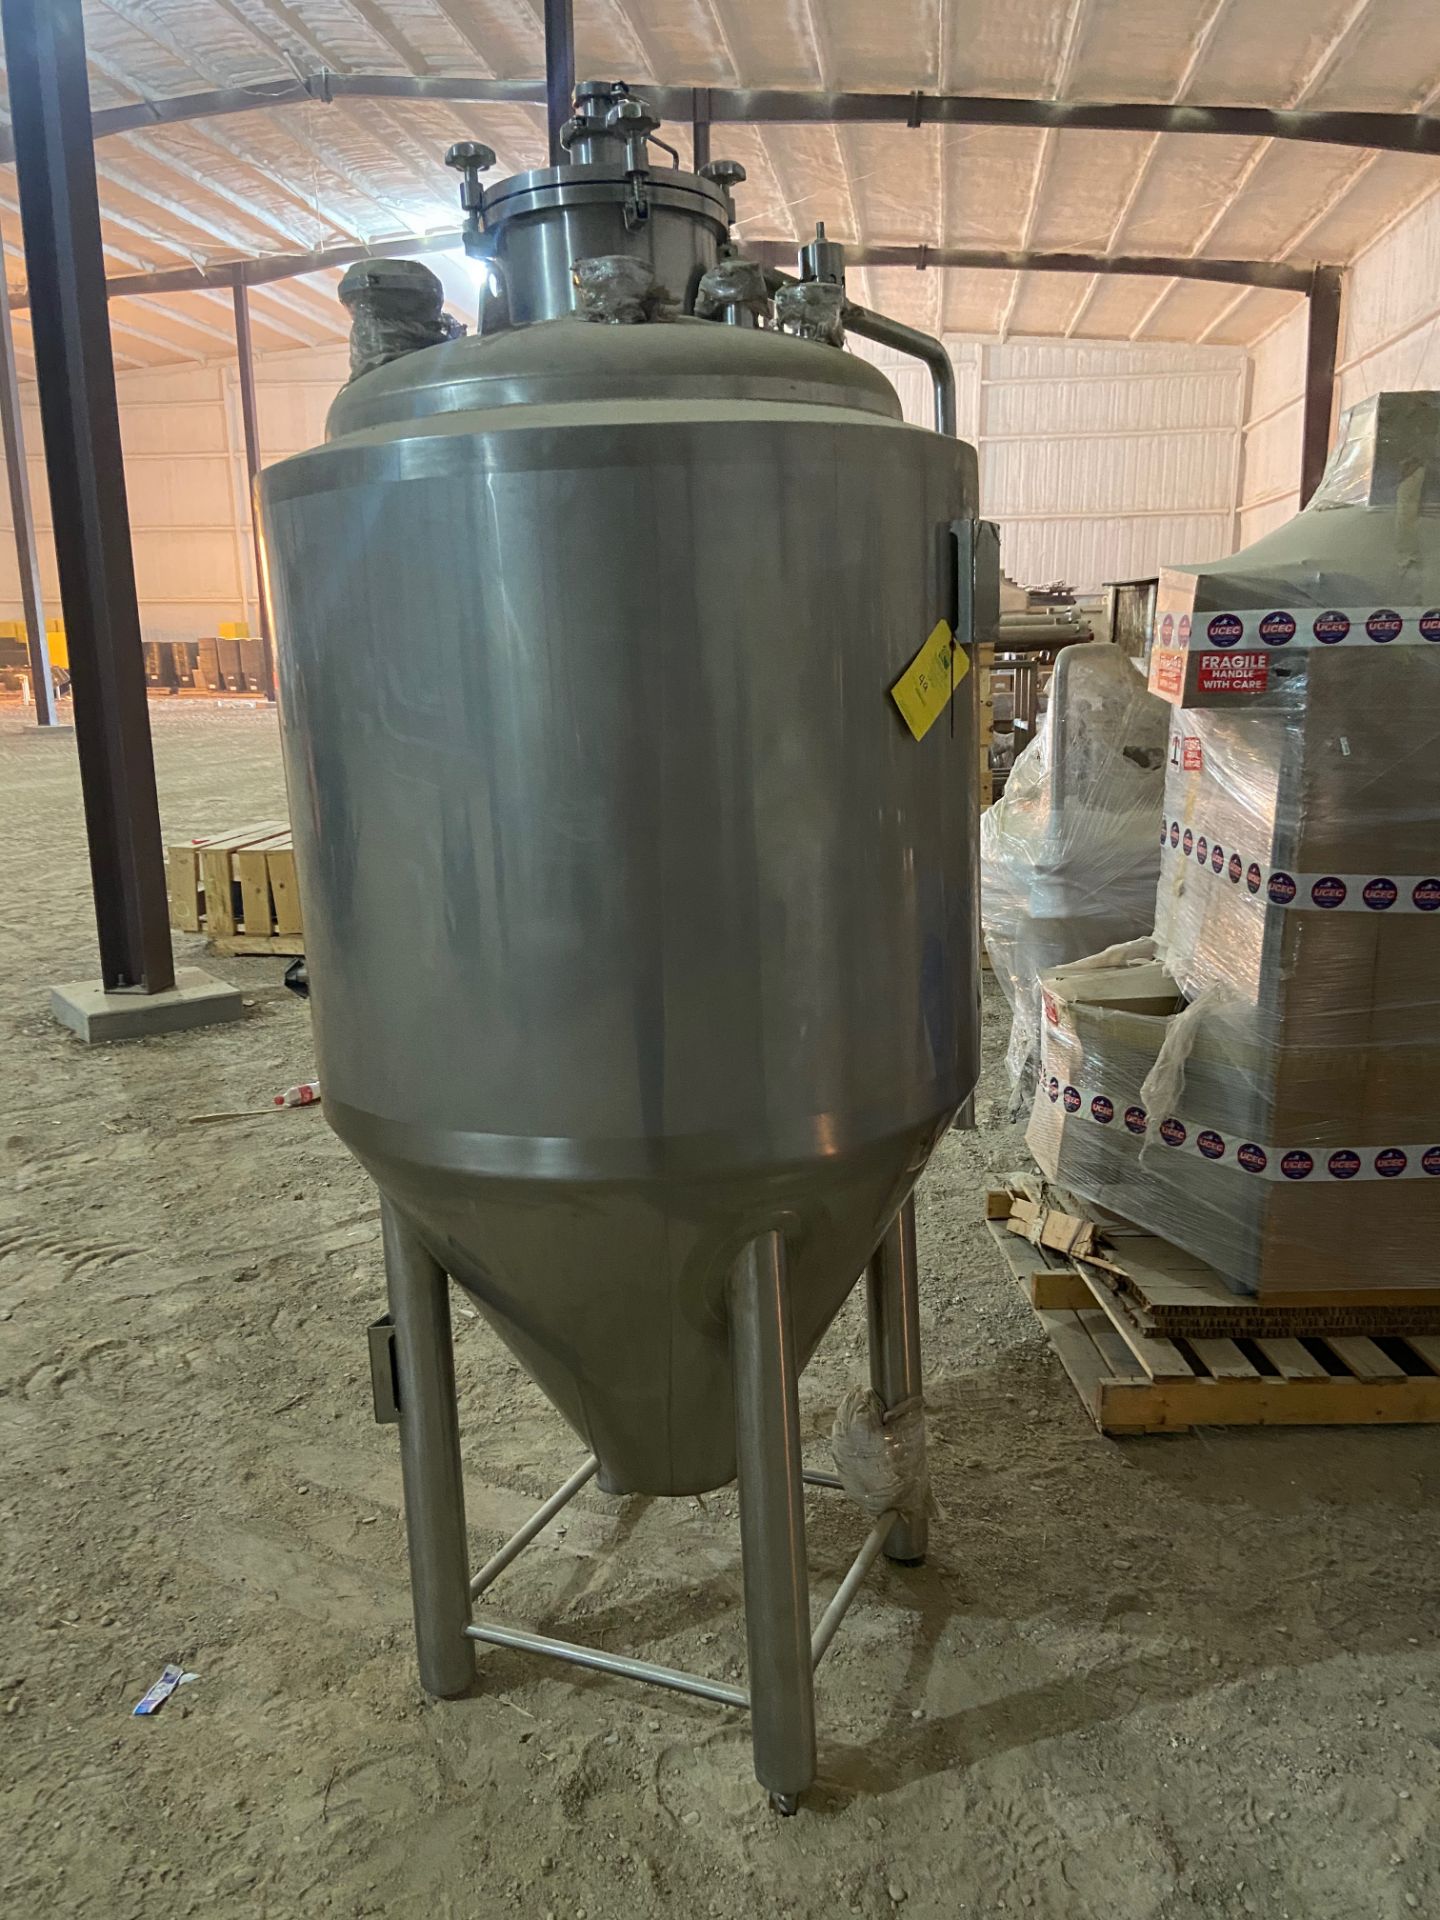 NEW Krones/ Cedarstone Industry Stainless Steel Jacketed Fermentation Tank, 4 BBL, Serial# CS19-48, - Image 4 of 9